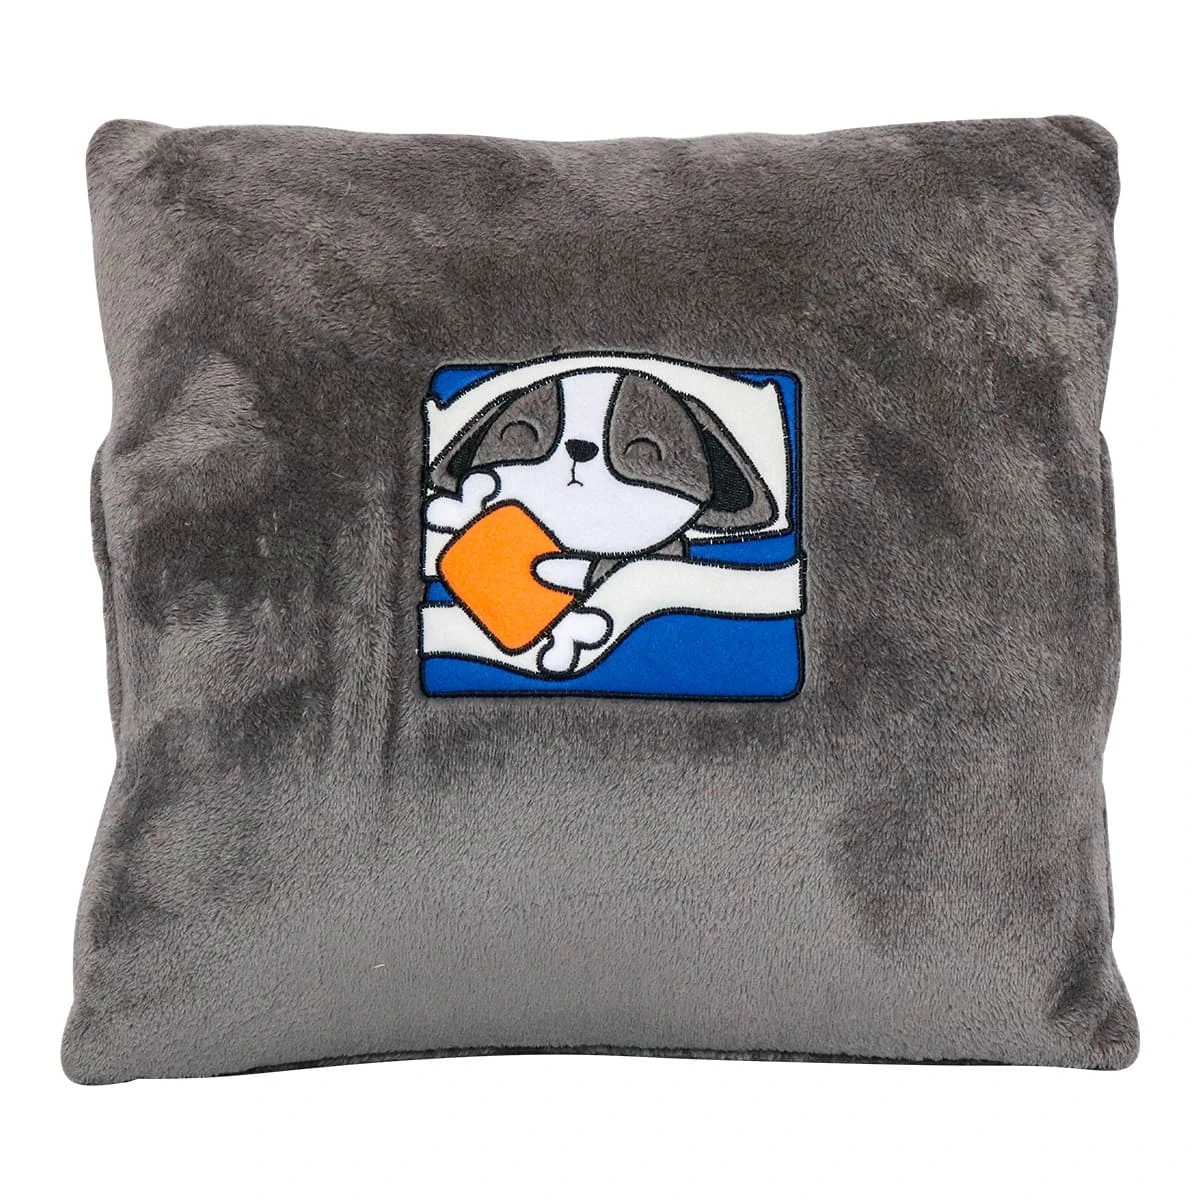 M Embroidery Flannel Hand Warmer Pillow Blanket (Grey)